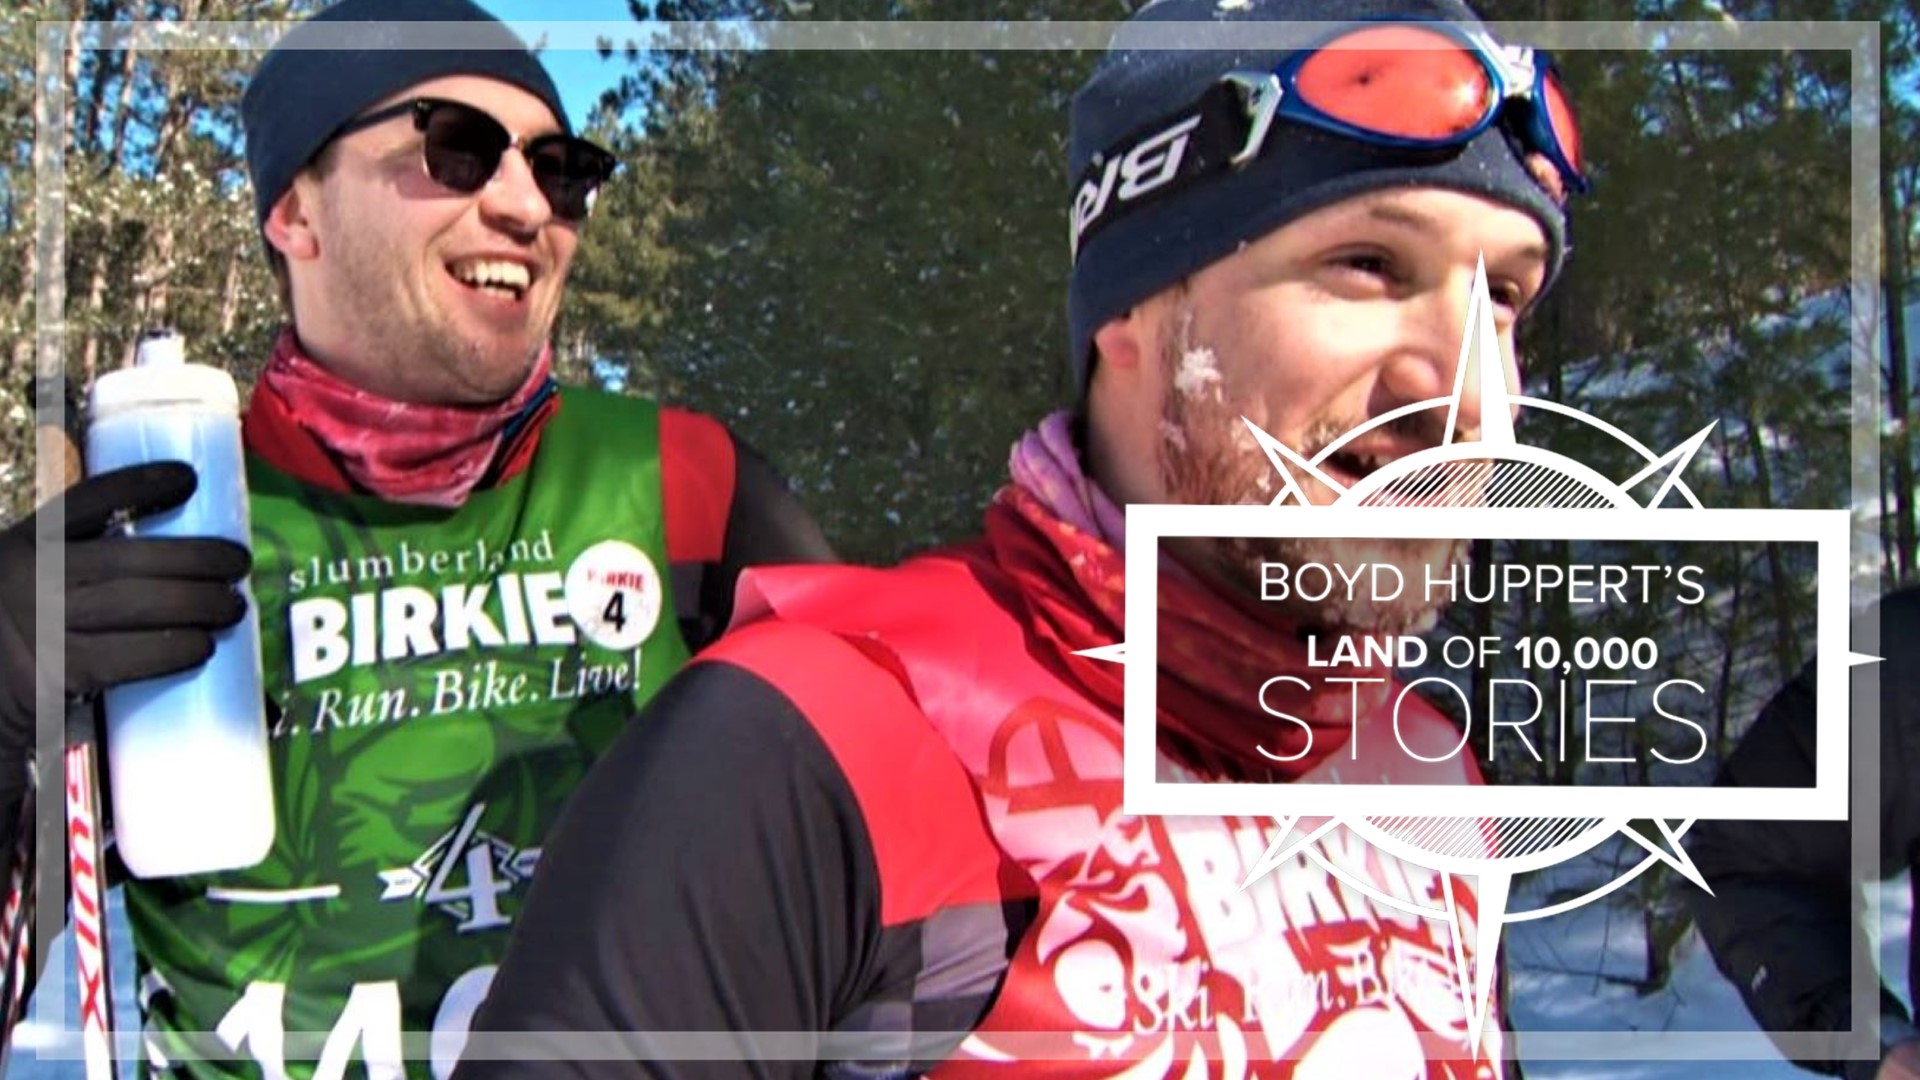 Chris Parr & Joe Dubay spent months practicing cross-country skiing in tandem.